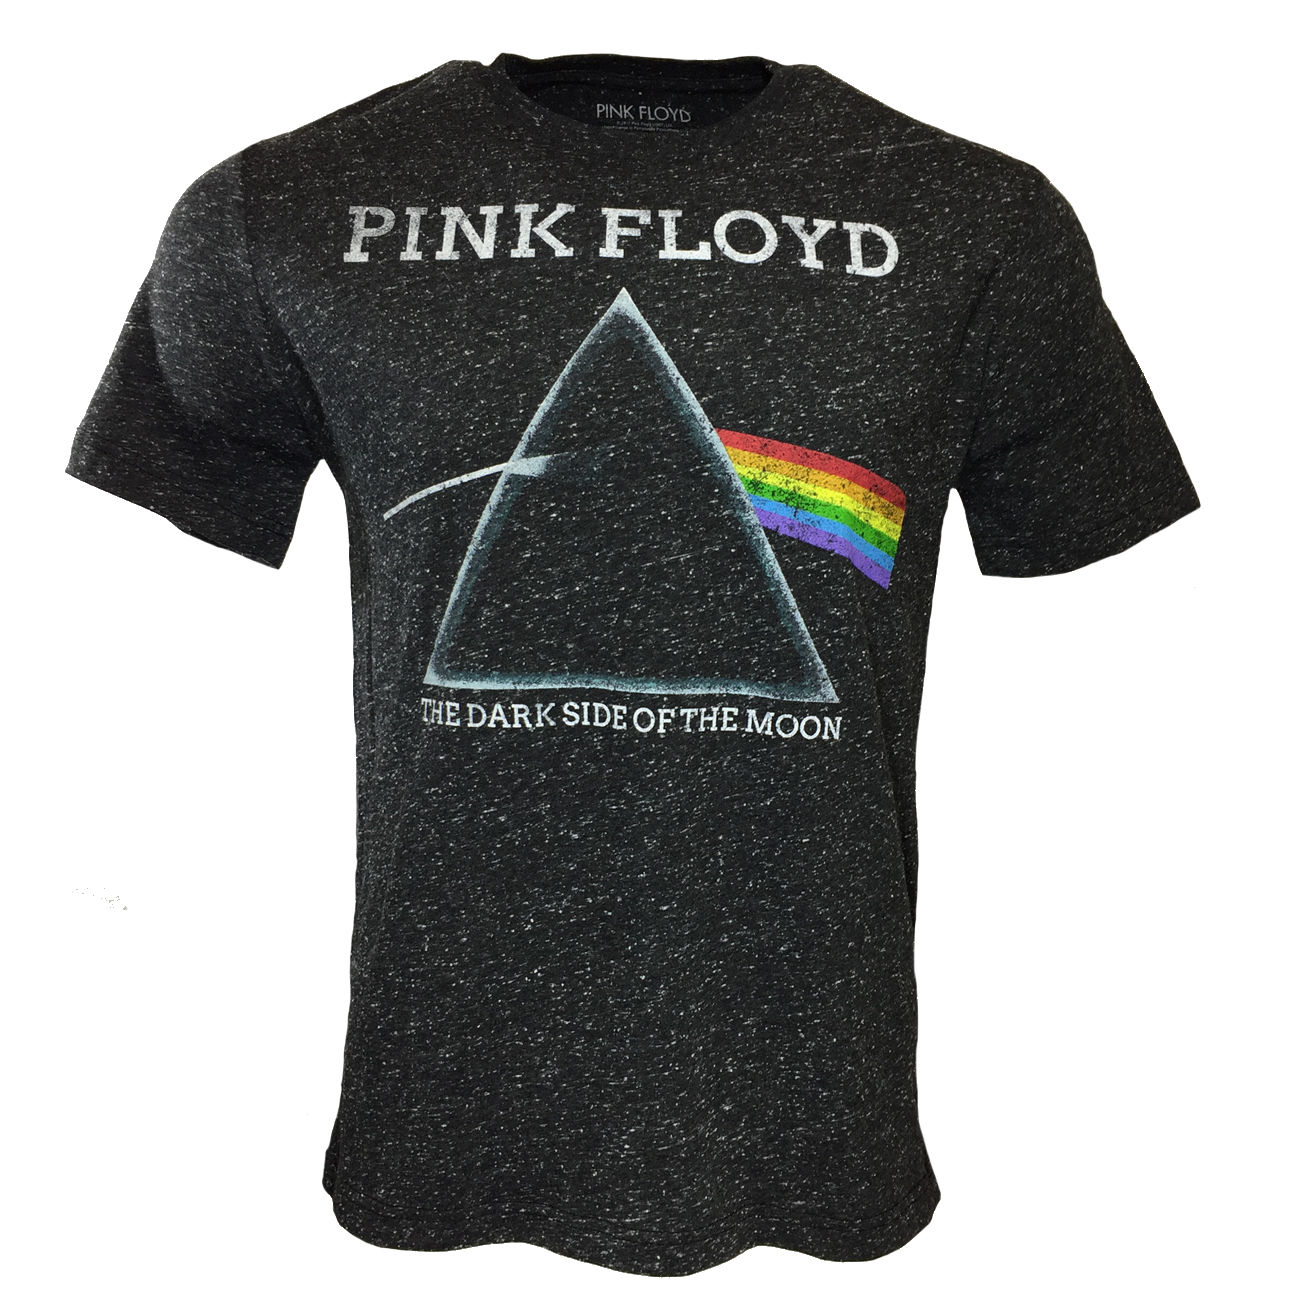 Pink Floyd Dark Side of the Moon Album Cover Graphic Print T-Shirt